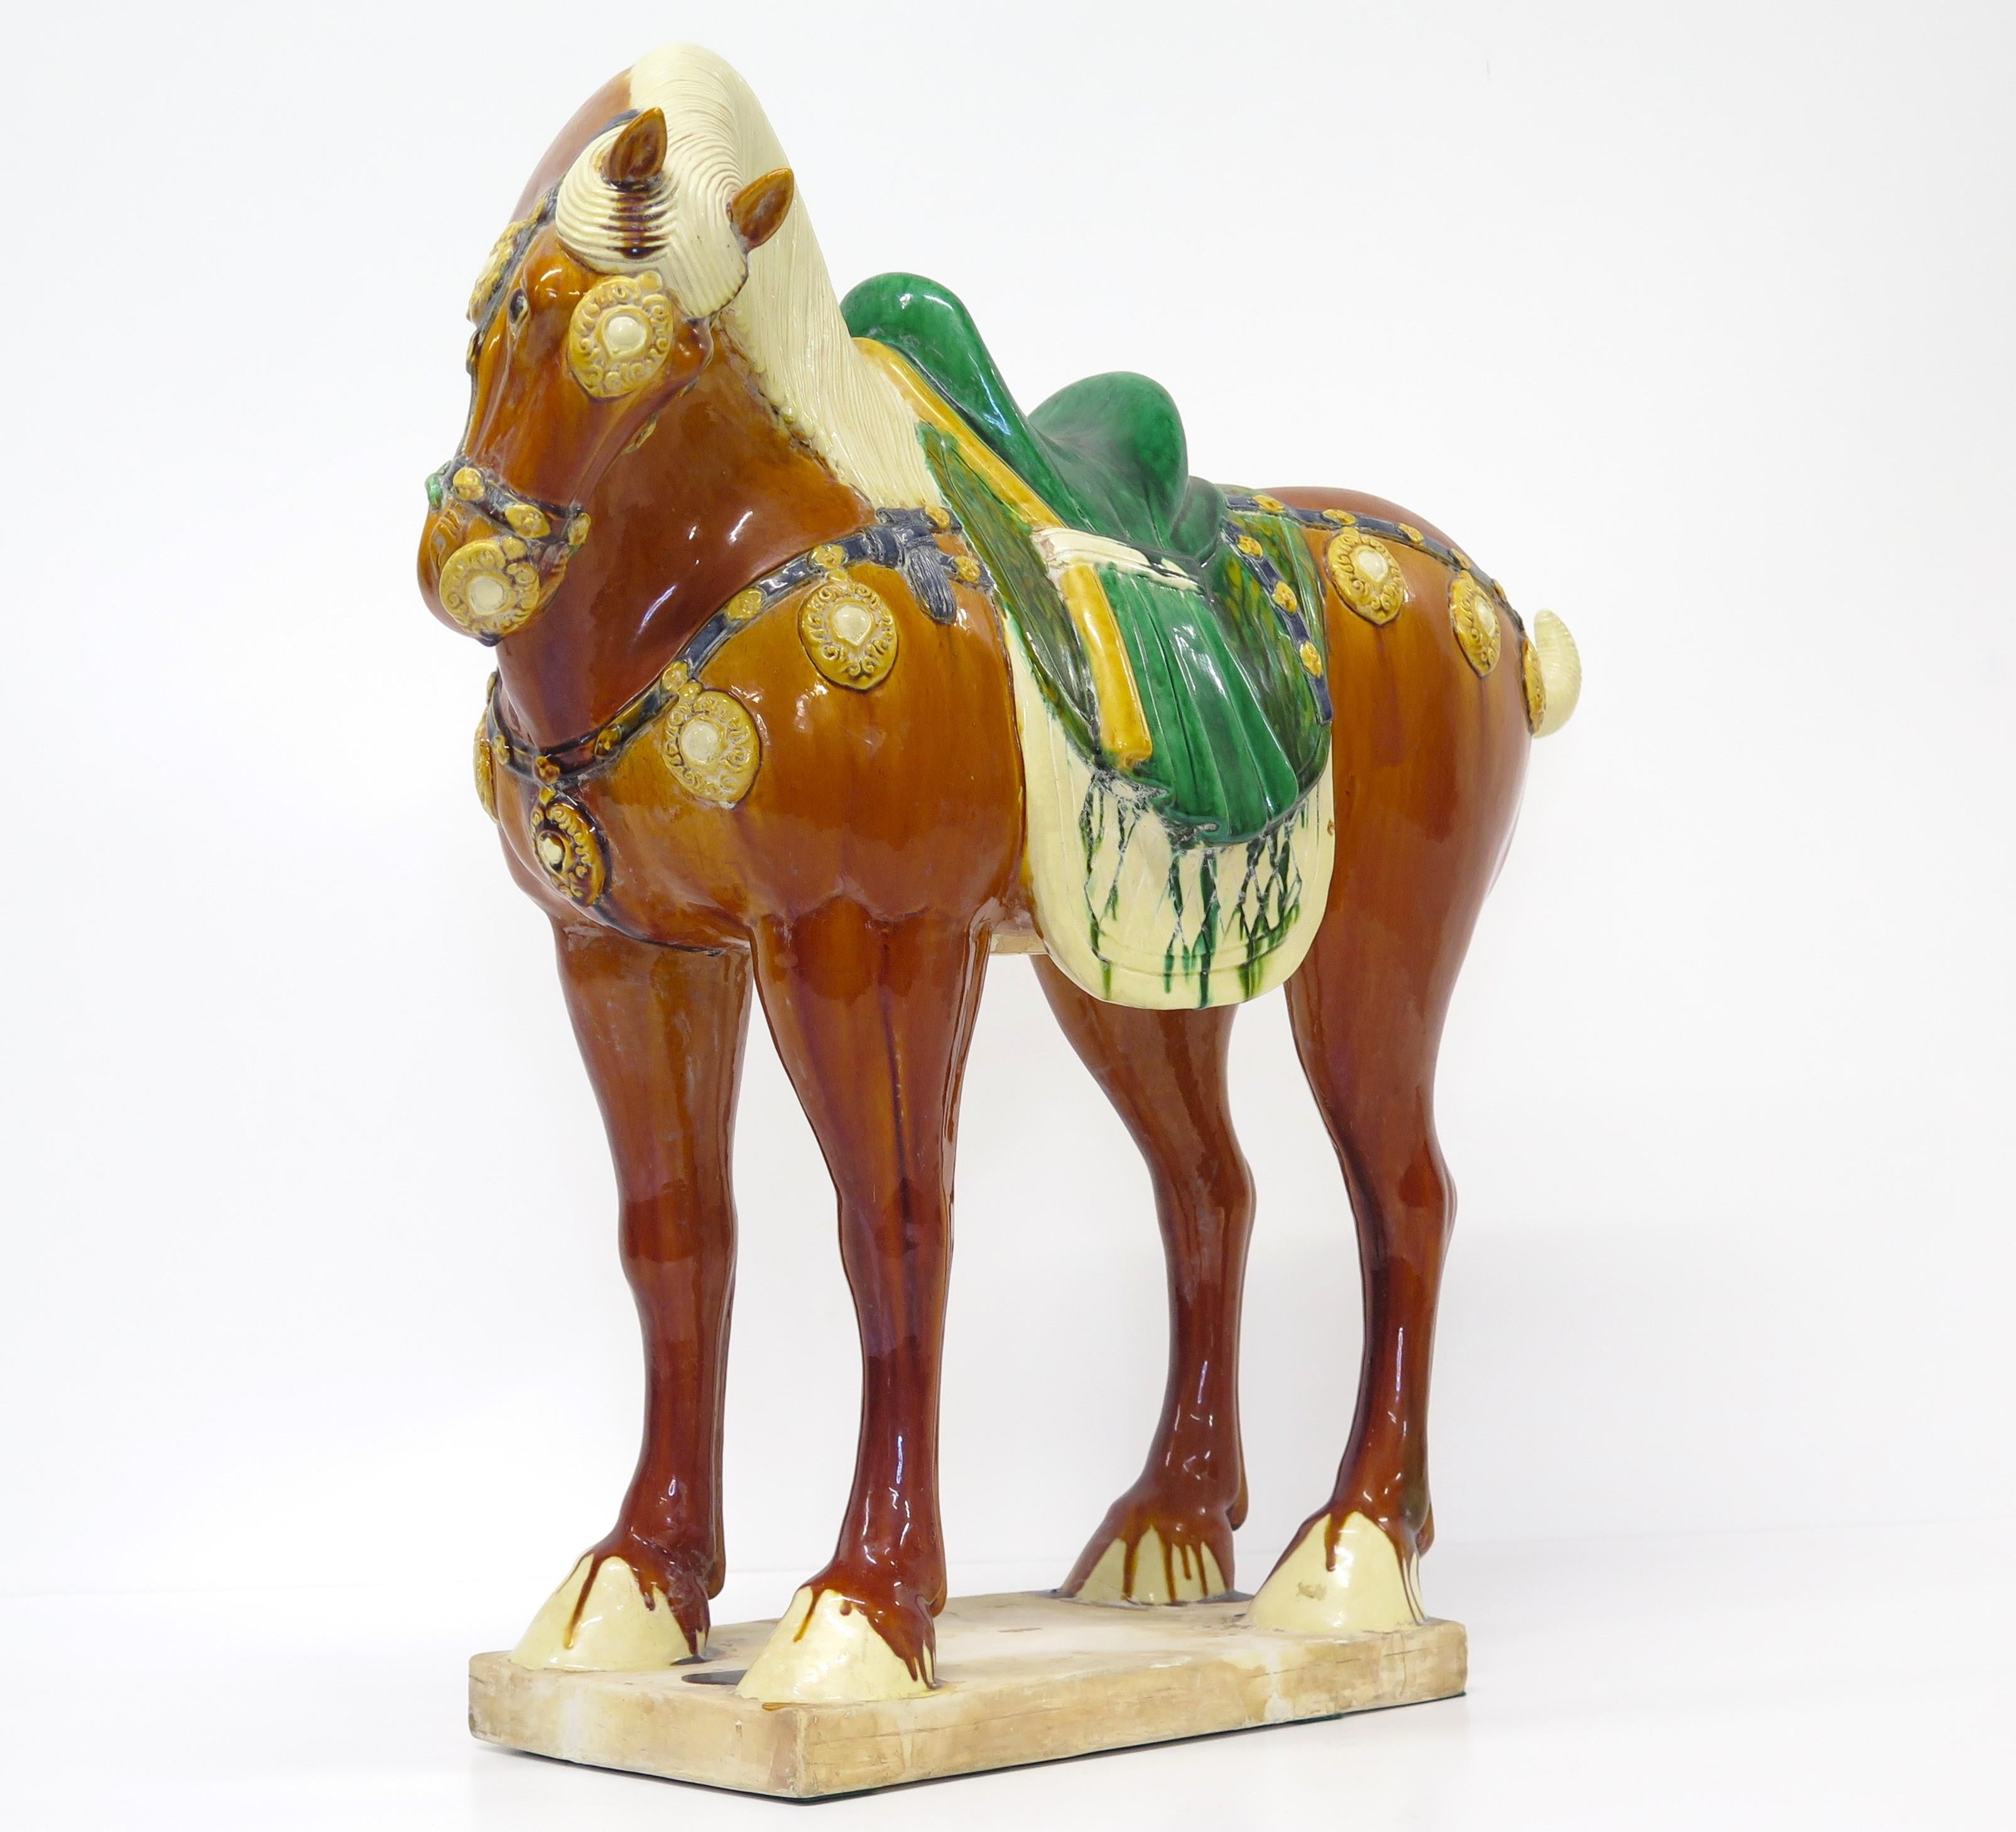 a beautifully modeled glazed Chinese ceramic horse, in the Tang-style, golden brown body with buff mane, removable tail, and hooves with a green saddle and harness with yellow-gold ornaments, mid-20th century, China

firing hairline / crack in the